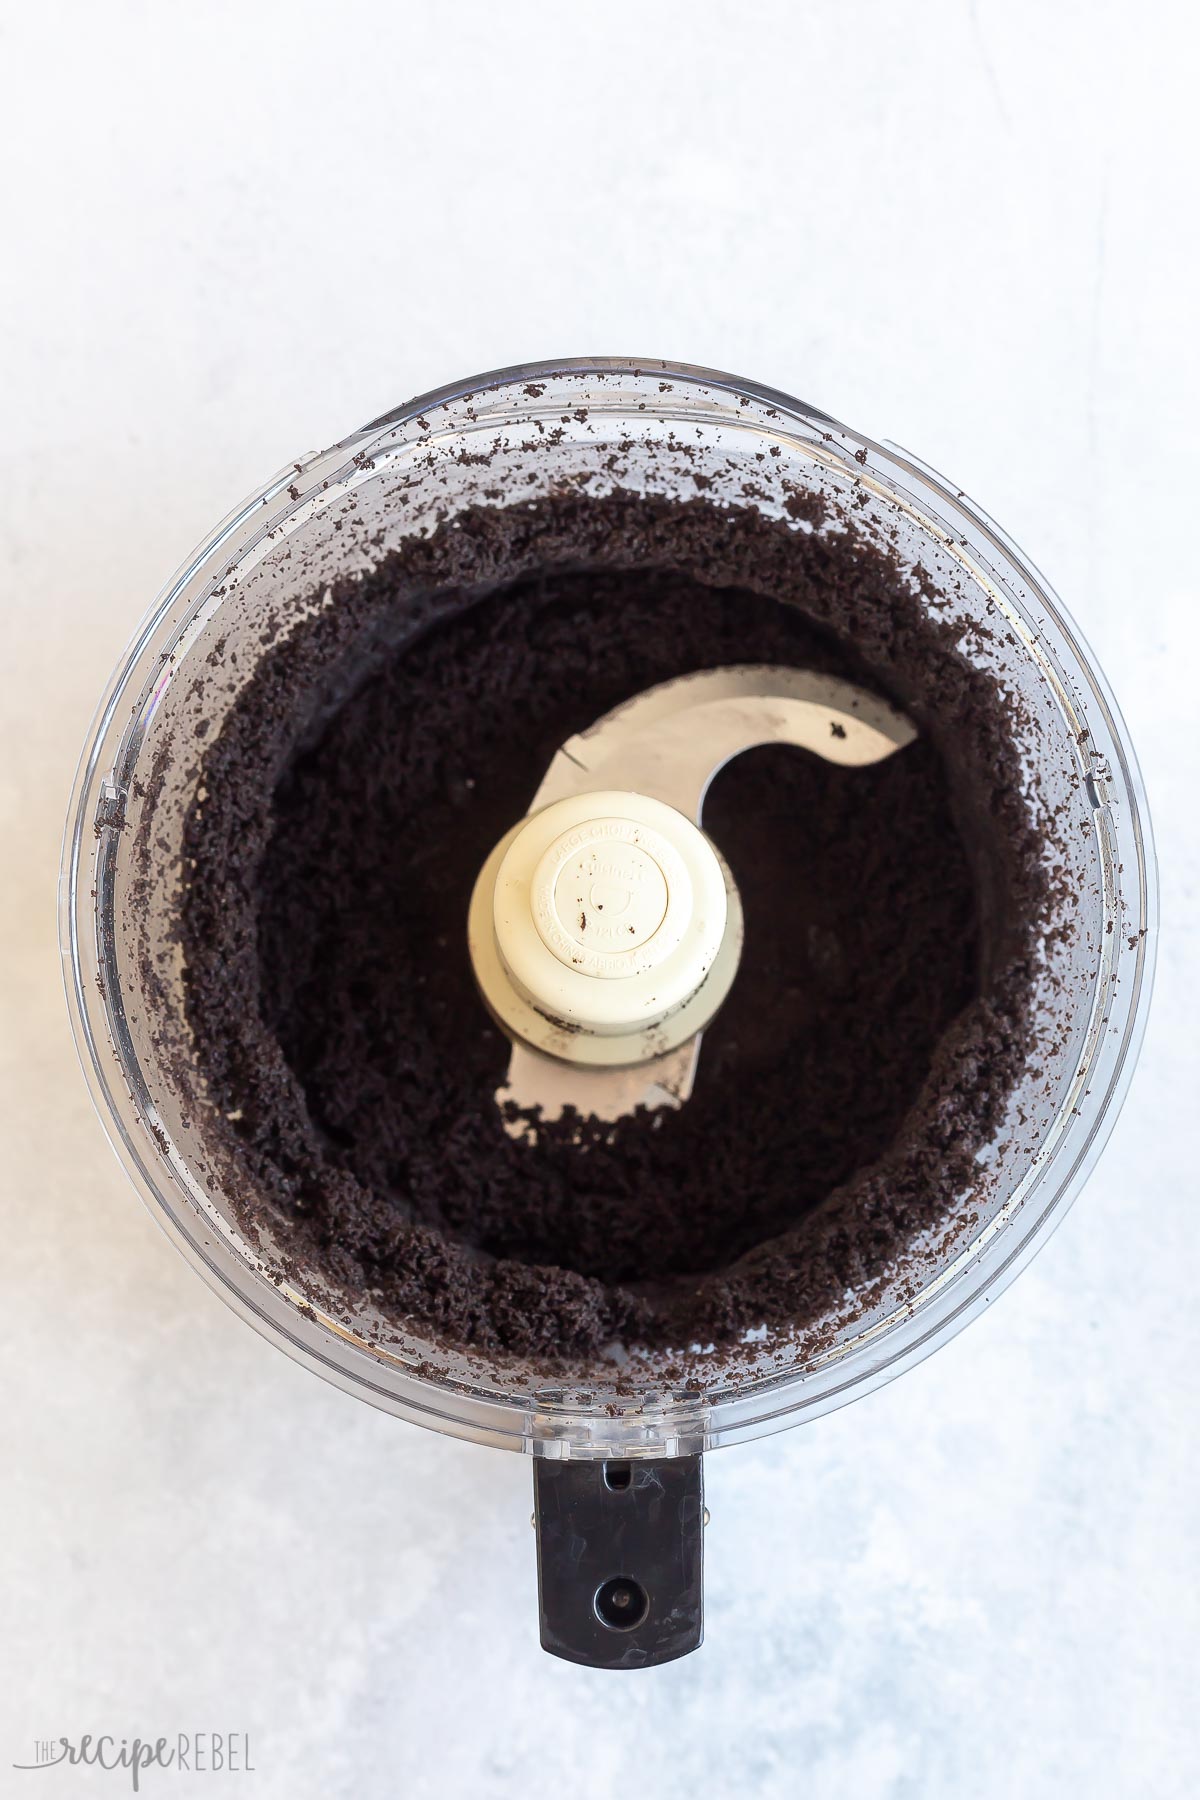 oreo crust being made in food processor.